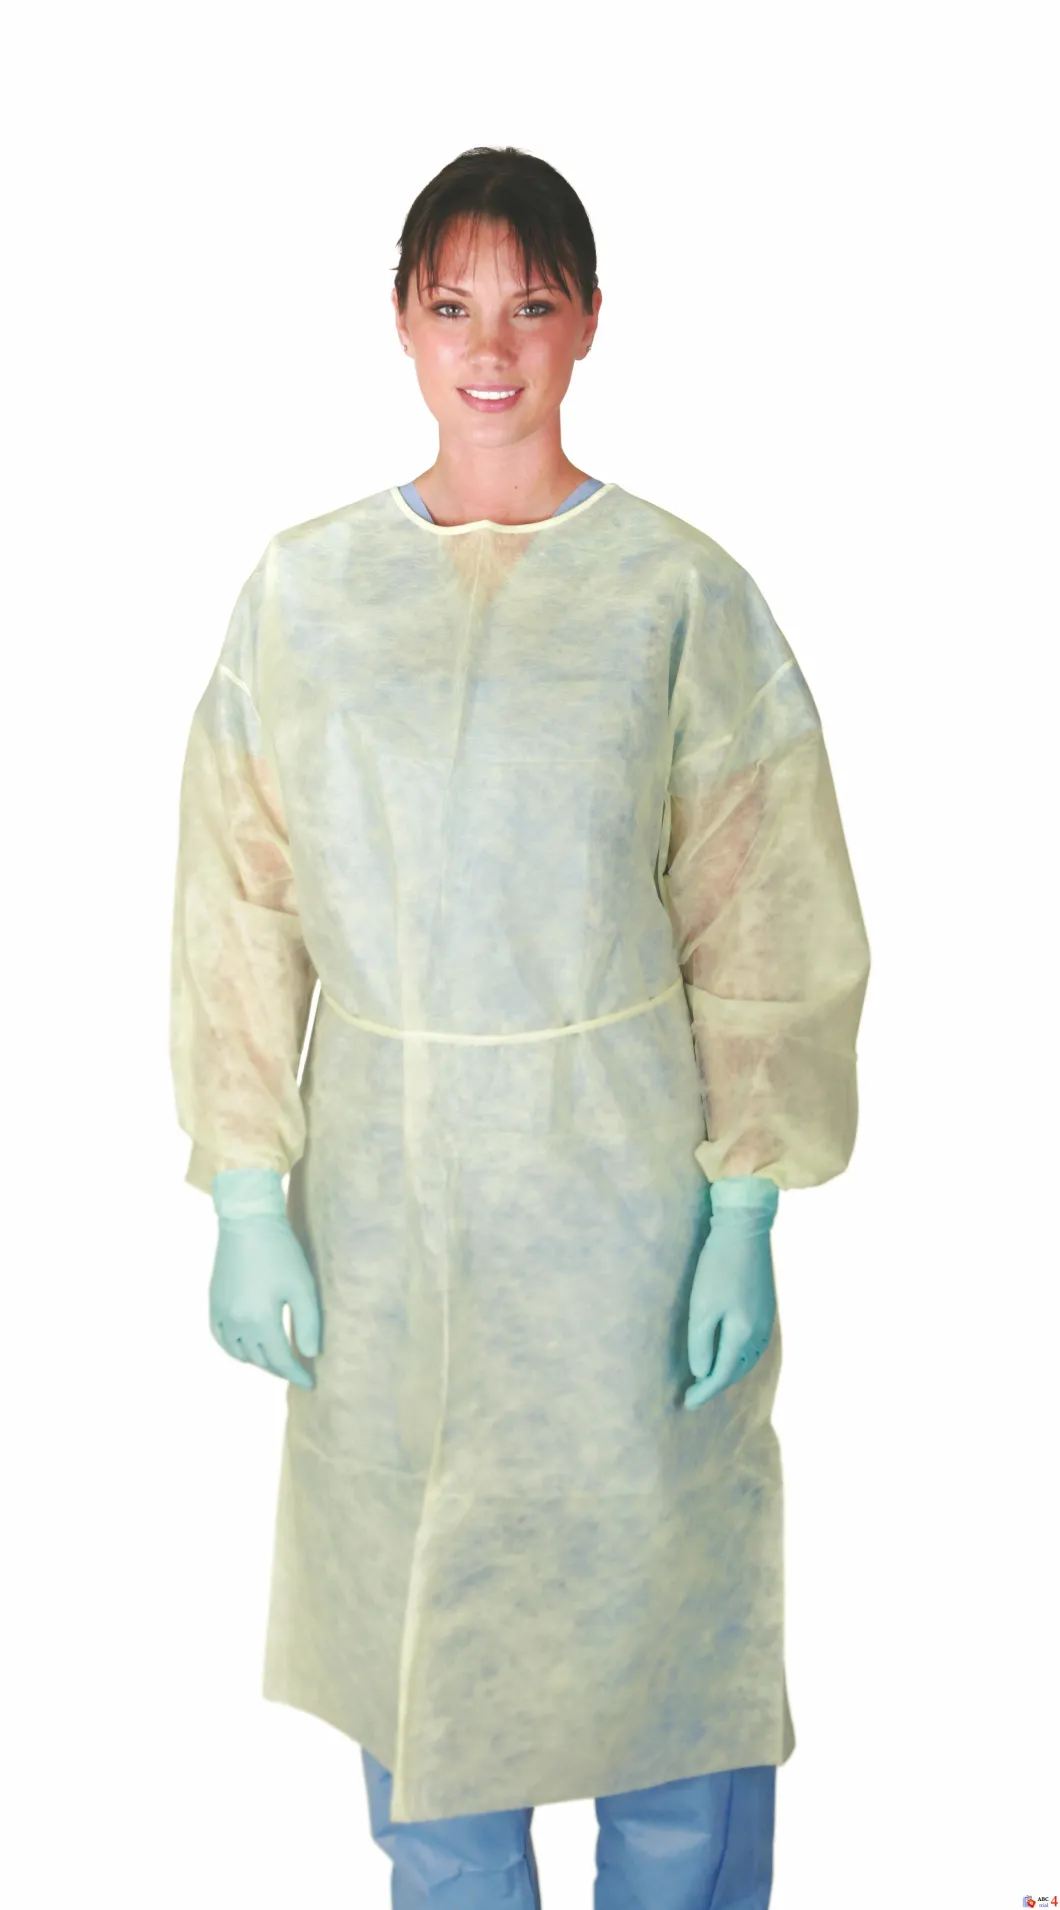 Ce/ FDA Chinese Suppliers Disposable Non-Woven Impervious Isolation Gown for Hospital Disposable Gowns